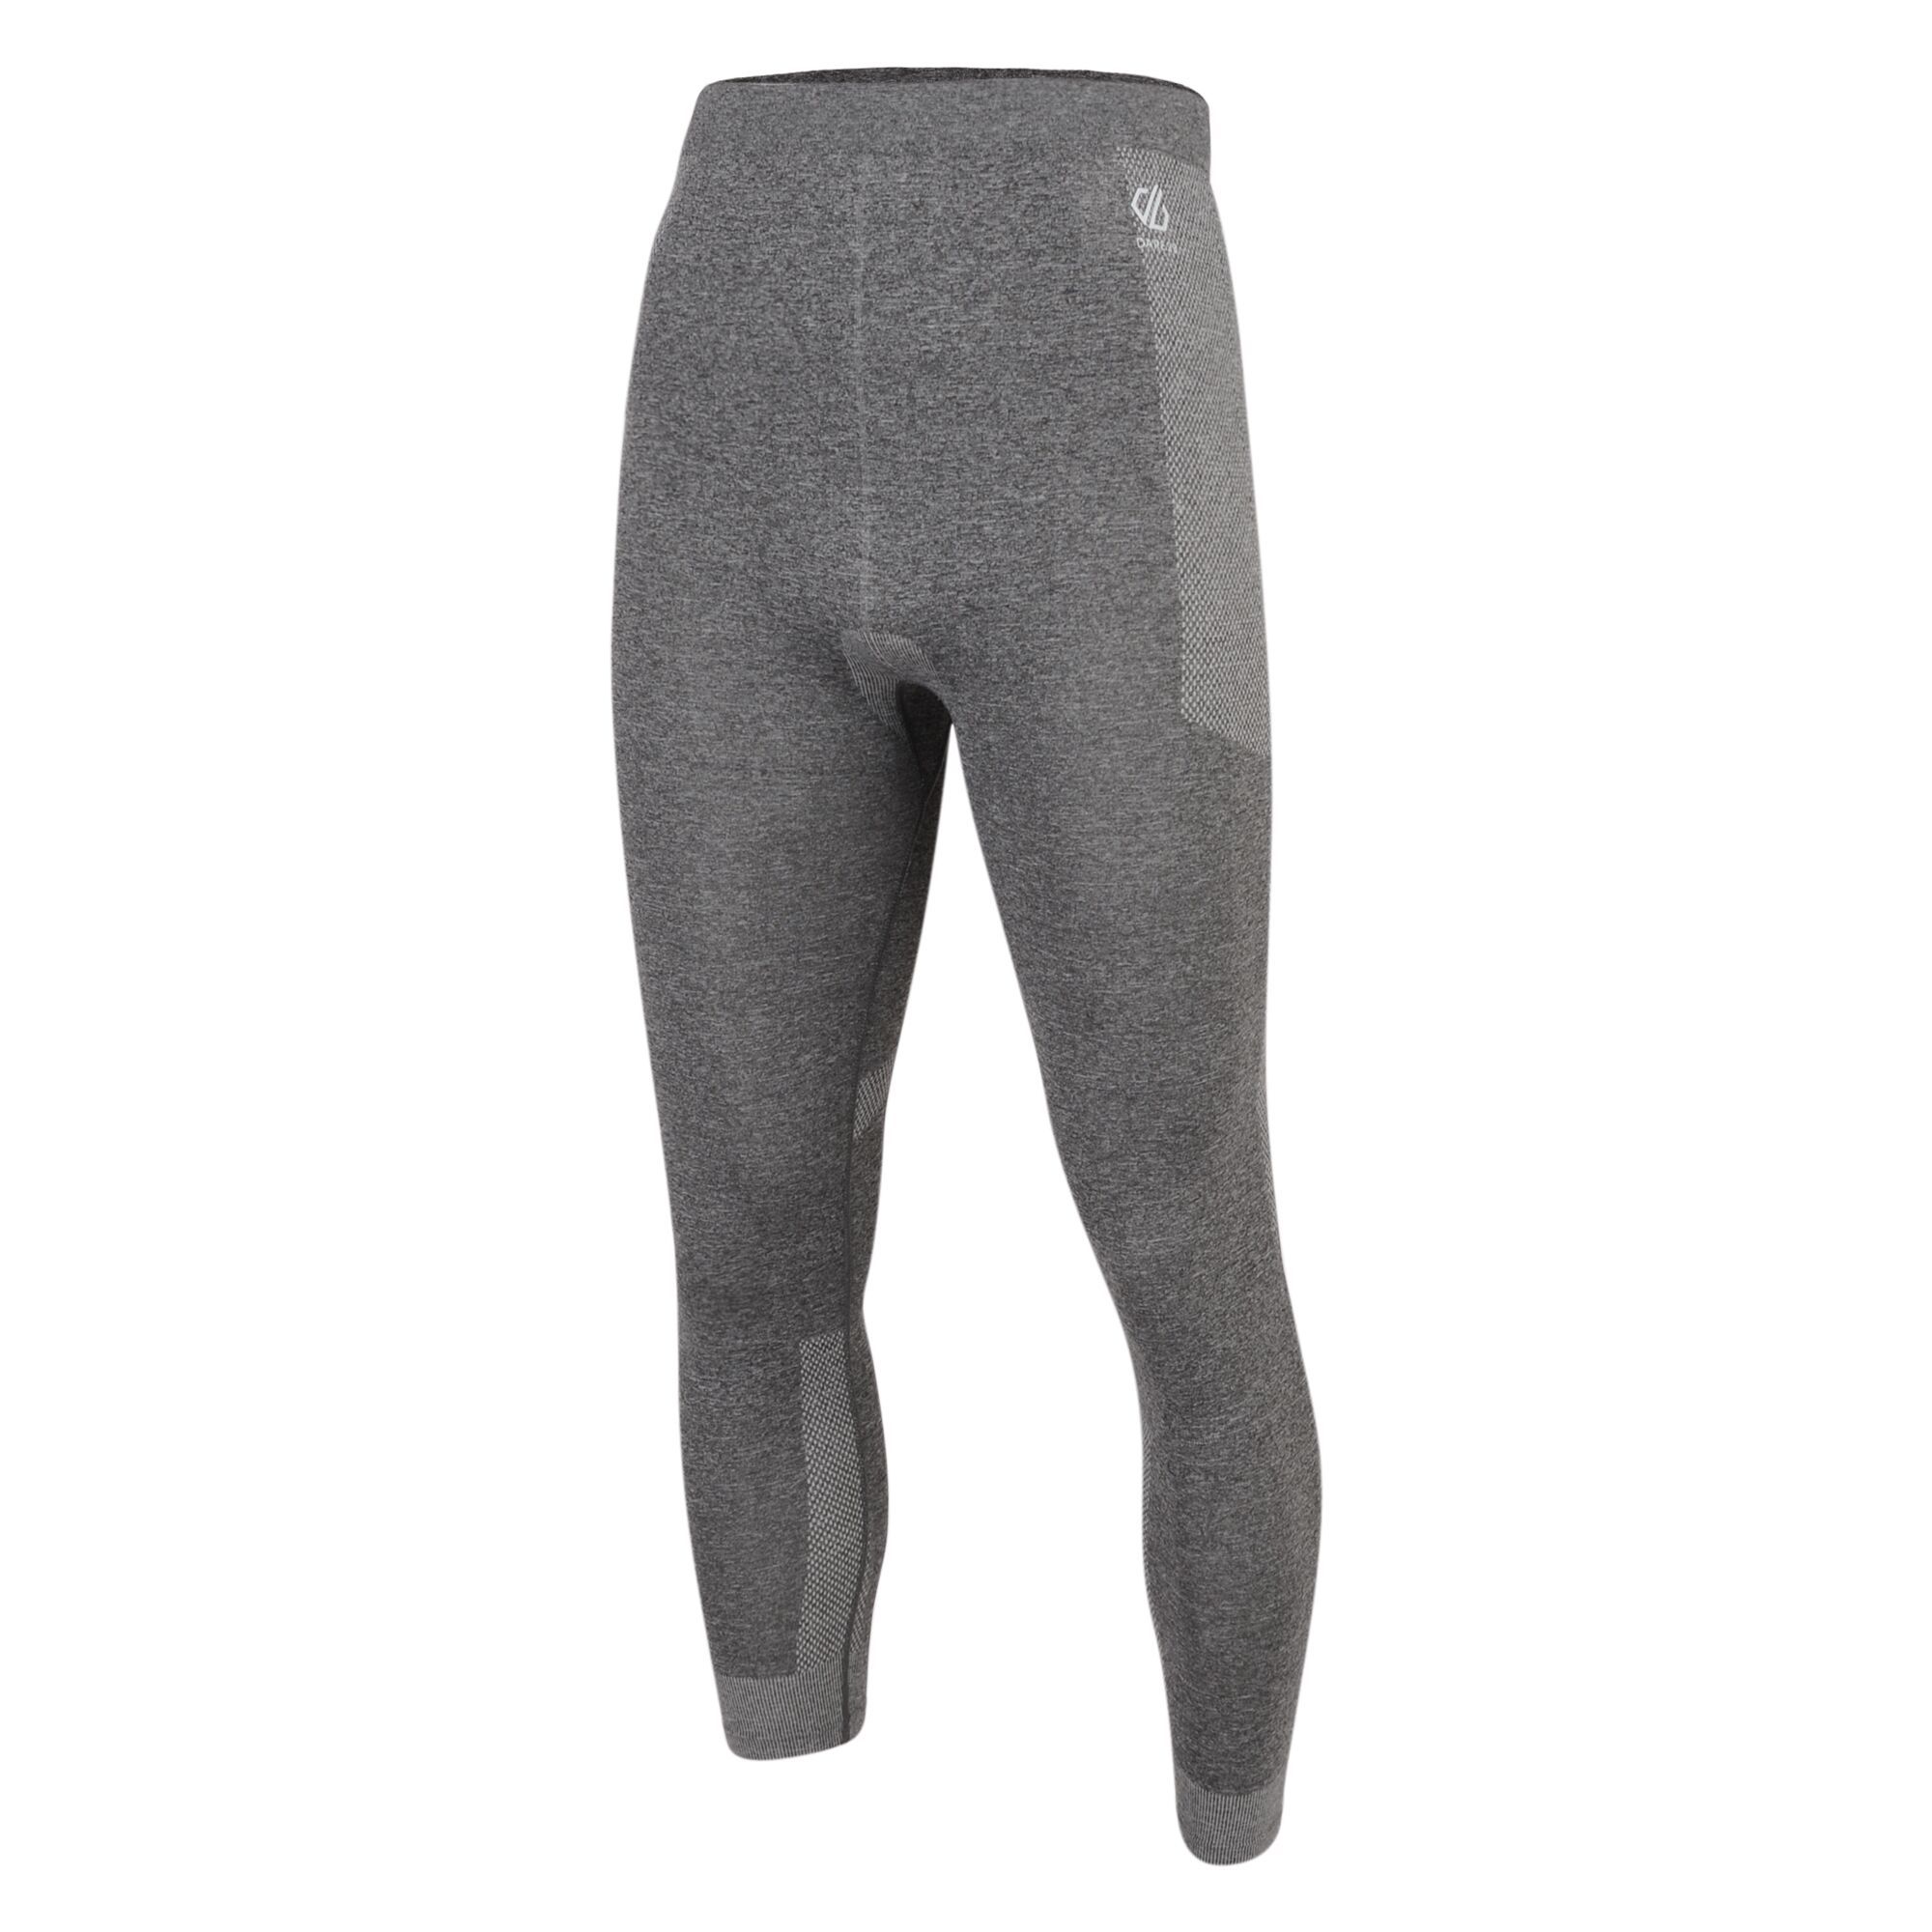 Material: 68% Polyester, 26% Polyamide, 6% Elastane. Performance base layer collection. SeamSmart Technology. Q-Wic Seamless polyester/ elastane knitted fabric. Ergonomic body map fit. Fast wicking and quick drying properties.  odour control treatment. Dare 2B Mens Tights/Shorts Sizing (waist approx): XS (28in/71cm), S (30in/76cm), M (32in/81cm), L (34in/86cm), XL (36in/92cm), XXL (38in/97cm), XXXL (40in/102cm), XXXXL (42in/107cm), XXXXXL (44in/112cm).